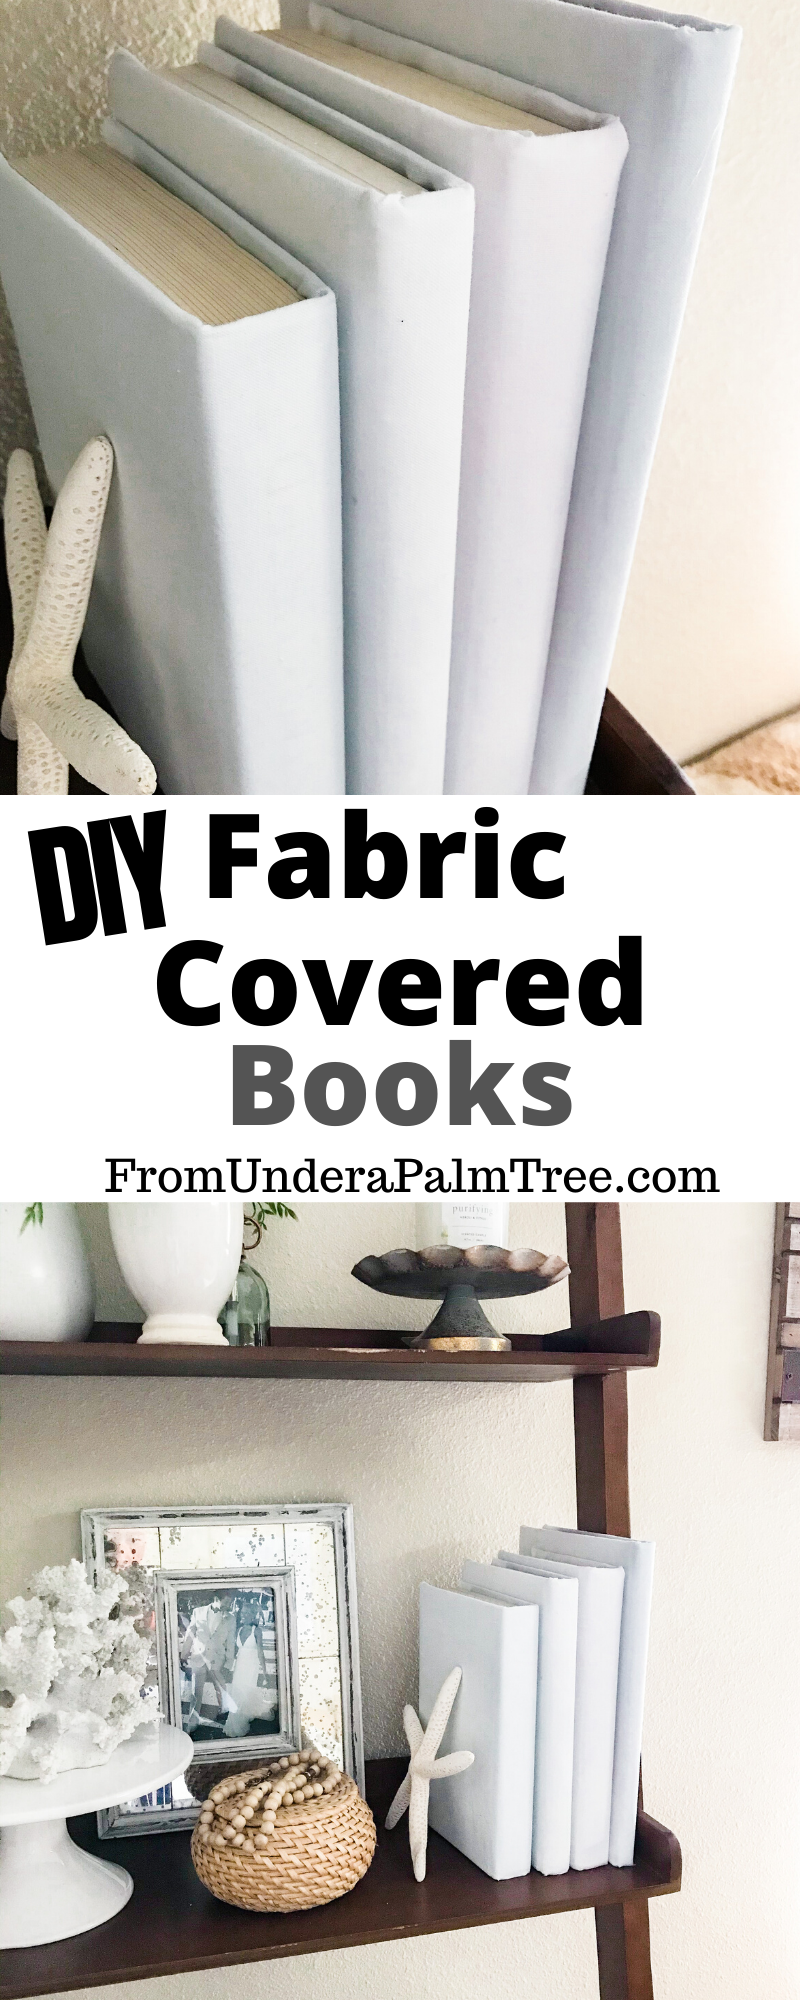 DIY | diy fabric covered books | how to cover books with fabric | DIY book covers | how to repurpose books | how to style bookshelf | styled bookshelf | DIY home decor | home decor | neutral home decor | how to style bookshelves | simple DIY projects | mom projects |